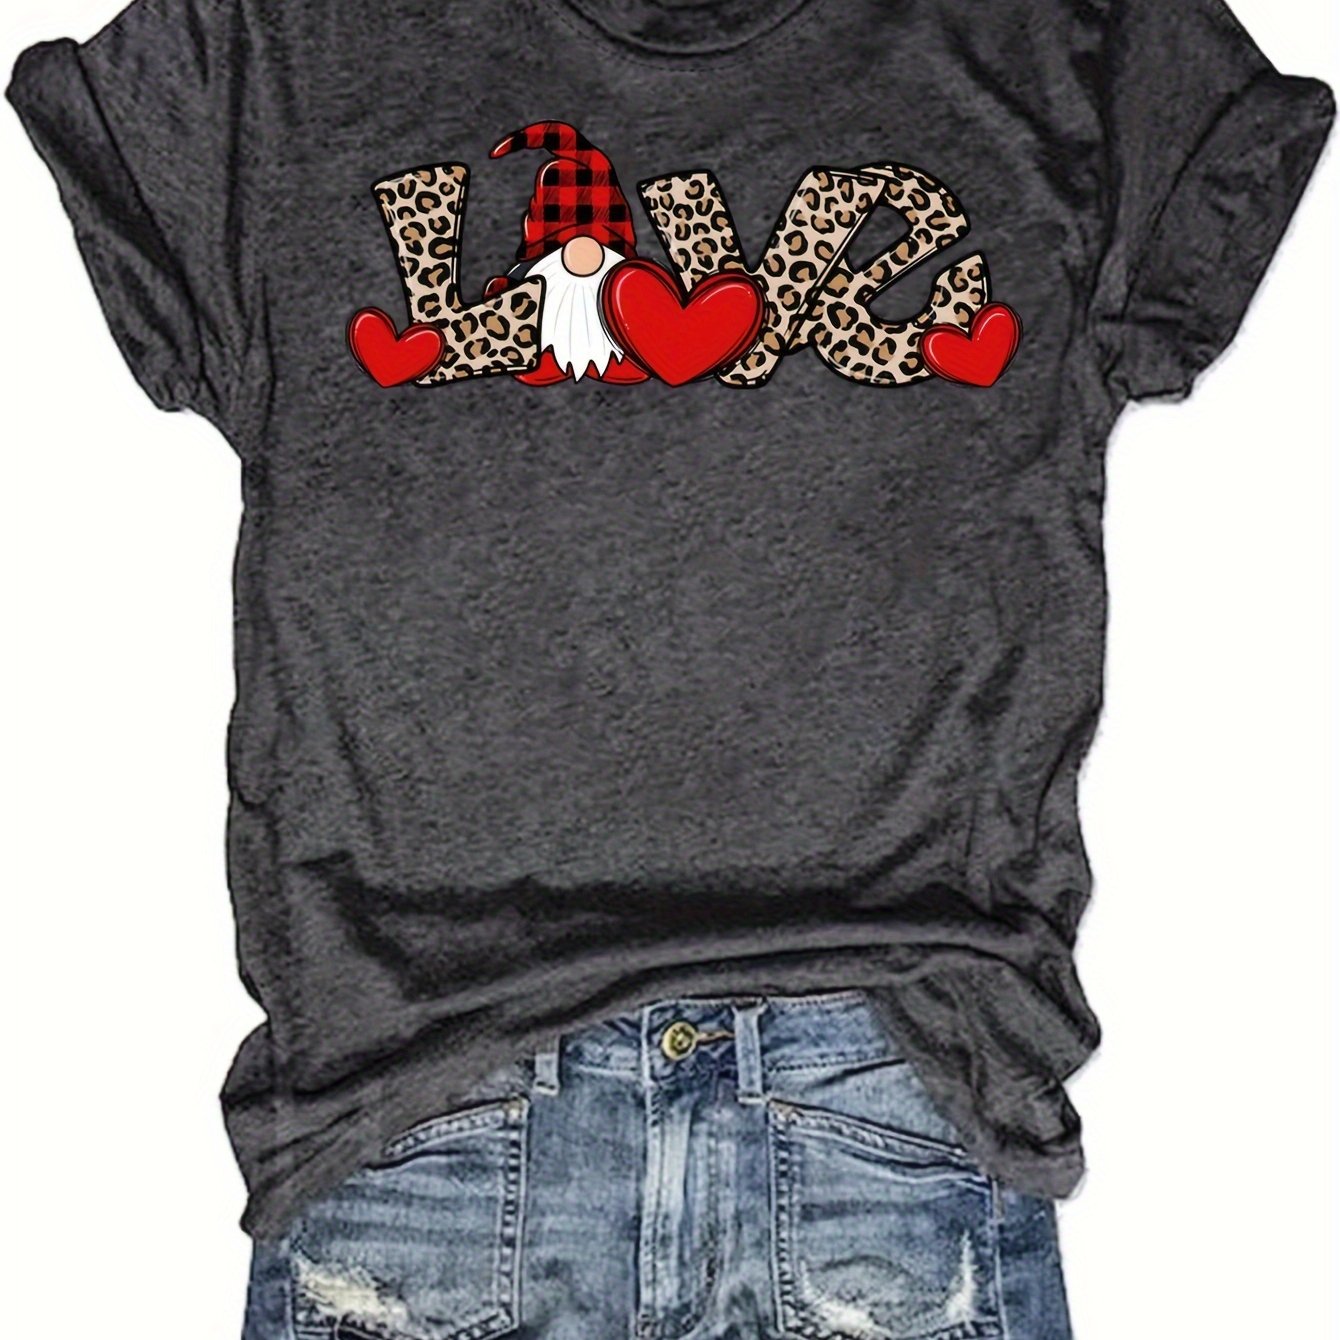 Leopard Love & Gnomes Print T-shirt, Casual Short Sleeve Top For Spring & Summer, Women's Clothing